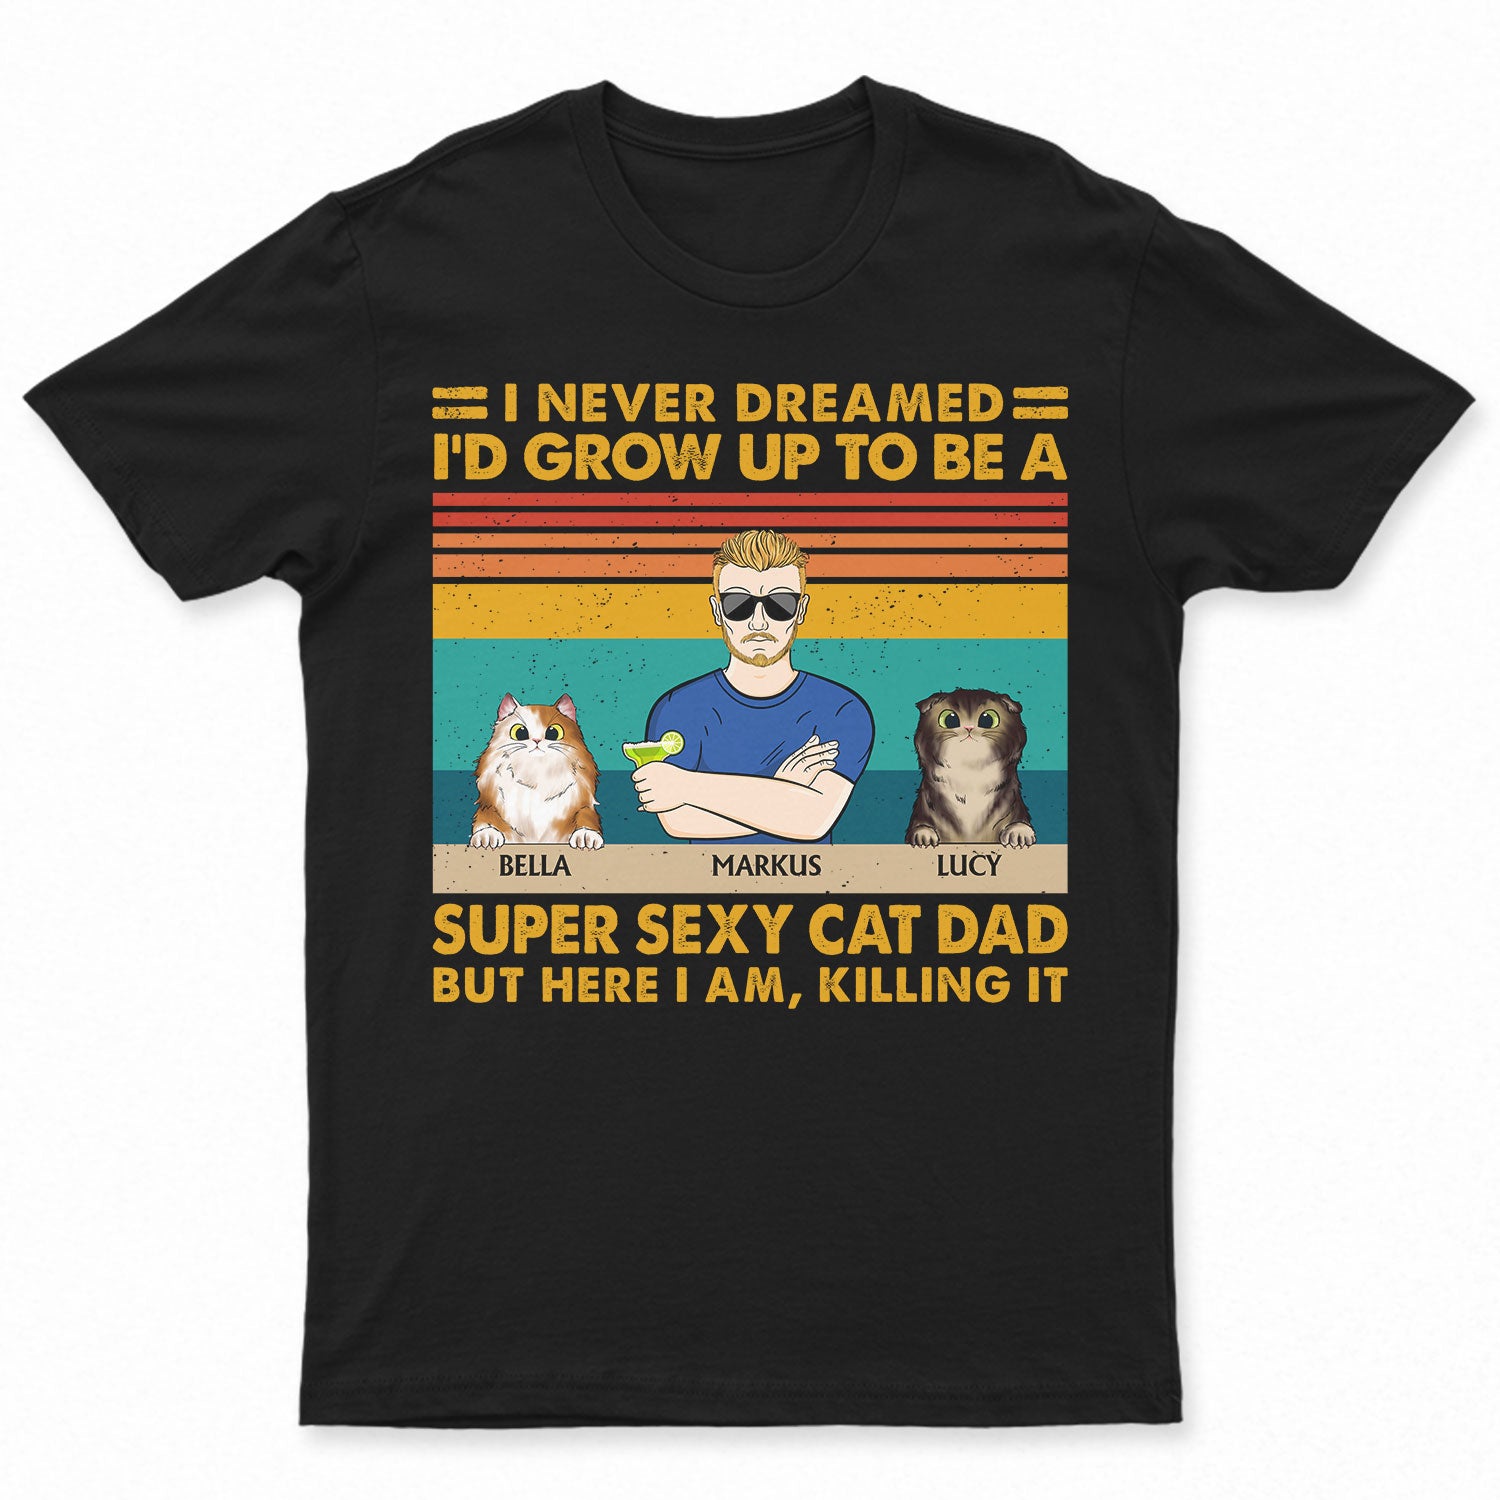 Super Sexy Cat Dad - Funny, Birthday Gift For Father, Husband, Cat Lovers - Personalized Custom T Shirt